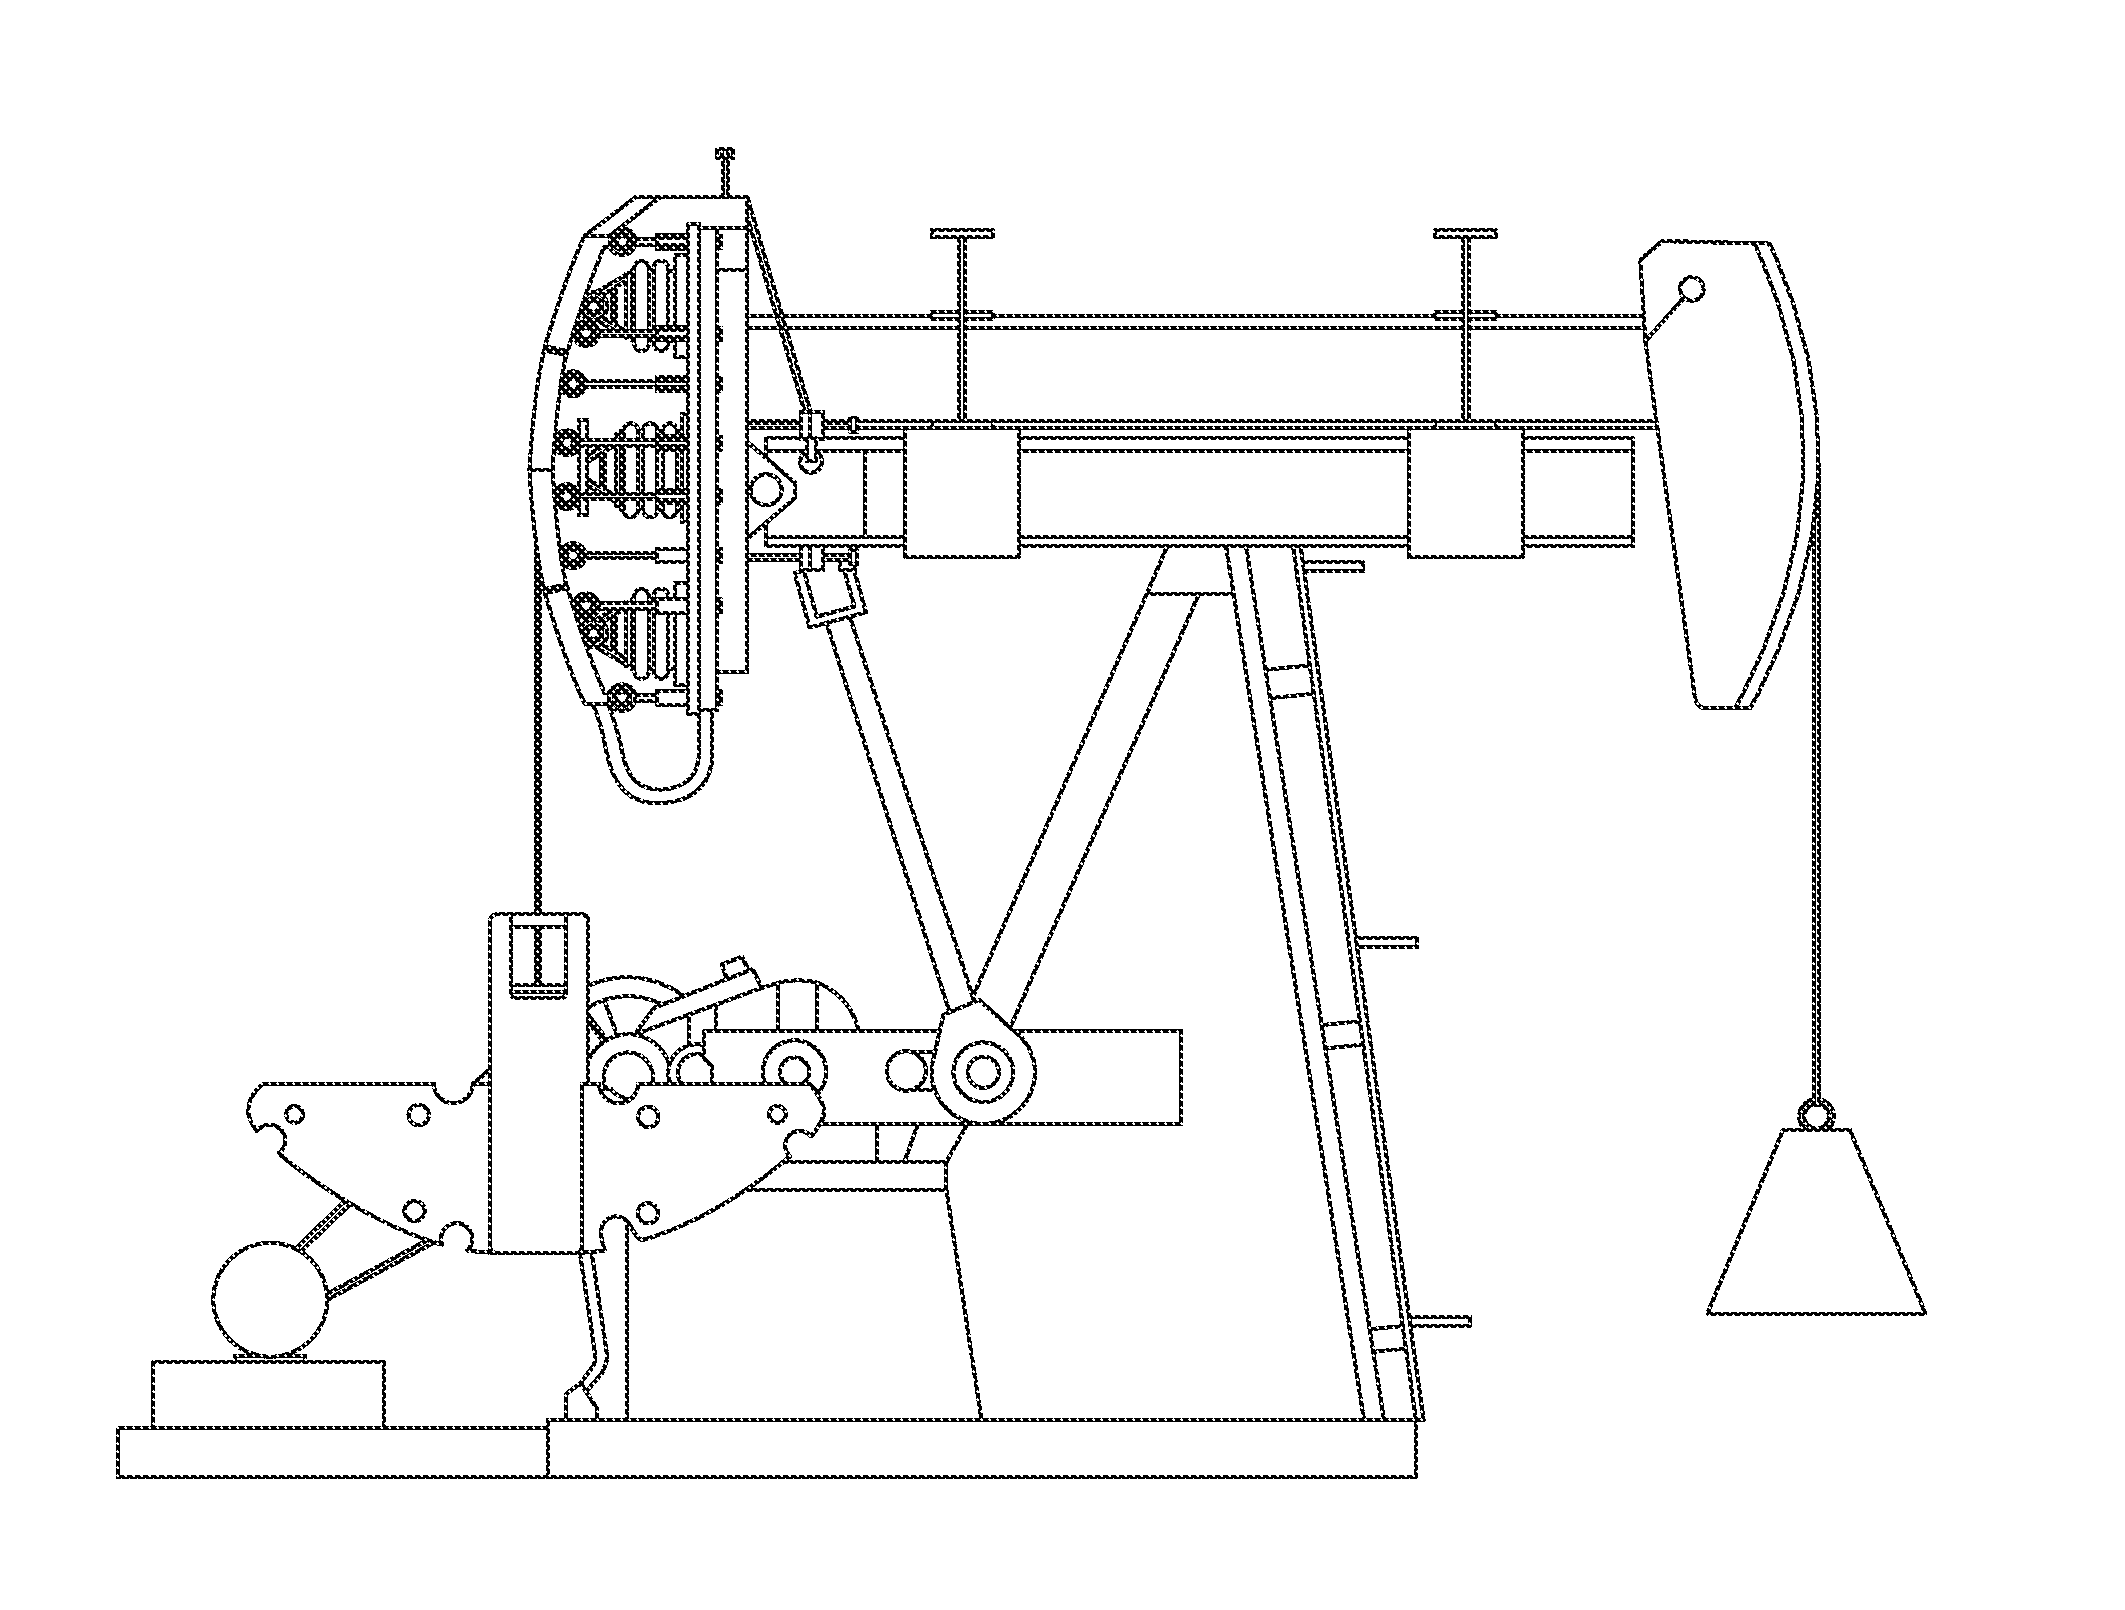 Counterbalance system for pumping units